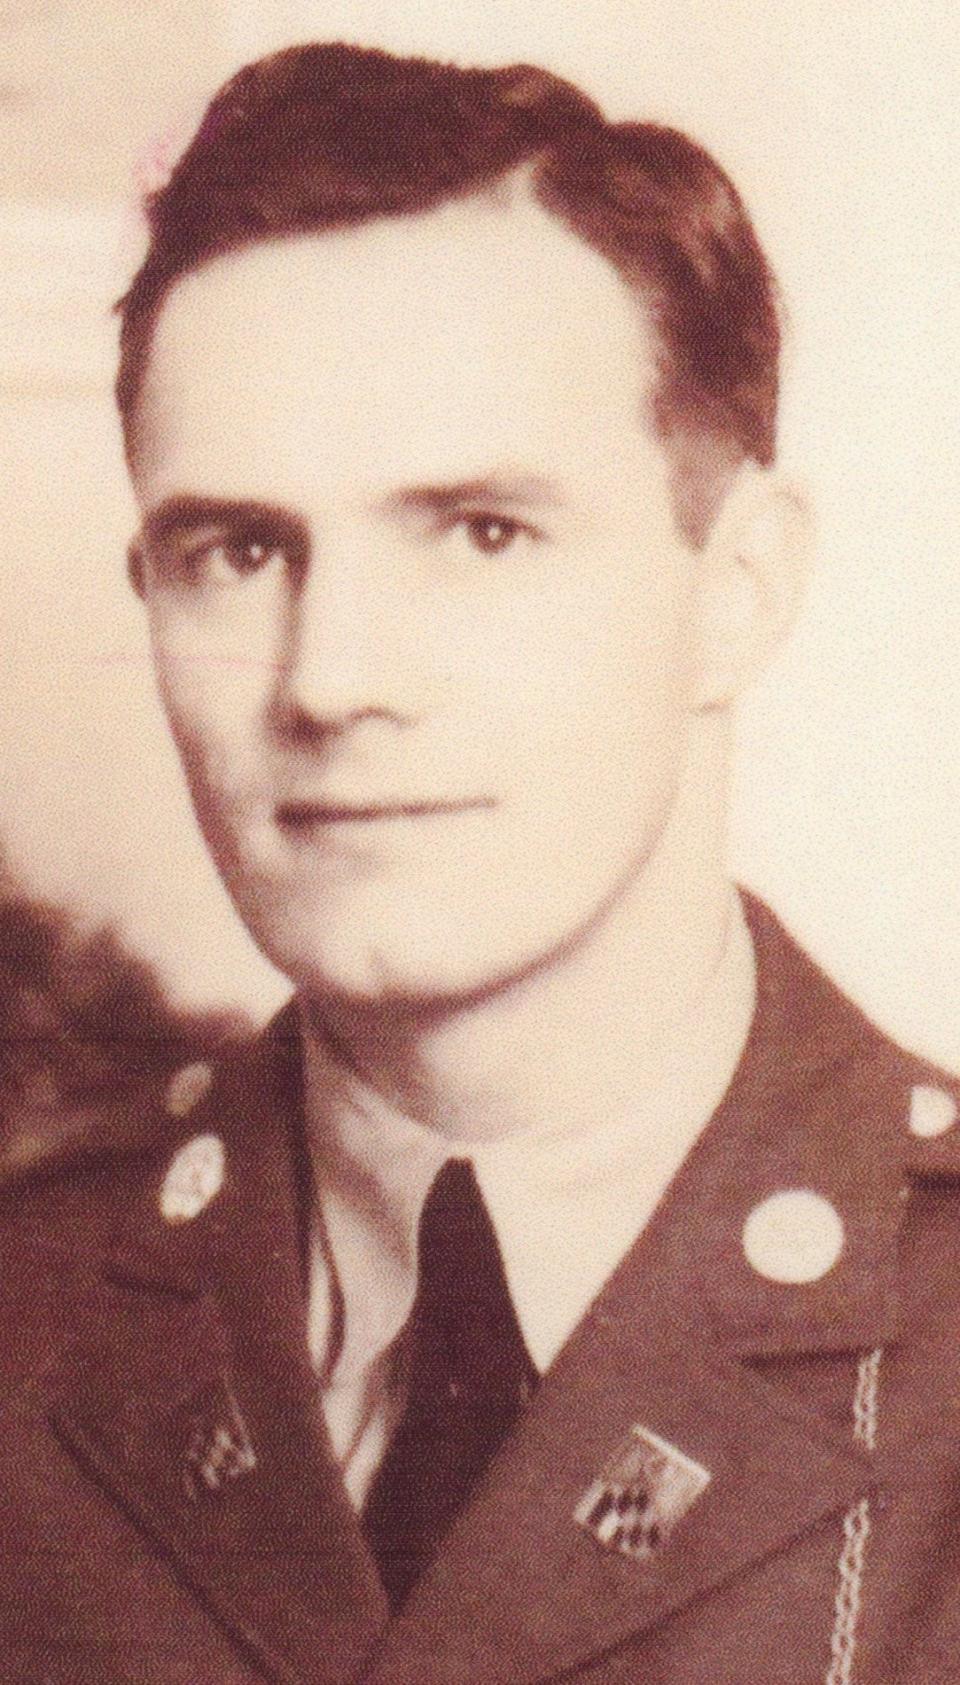 Charles Pratte as an aviation cadet in 1941